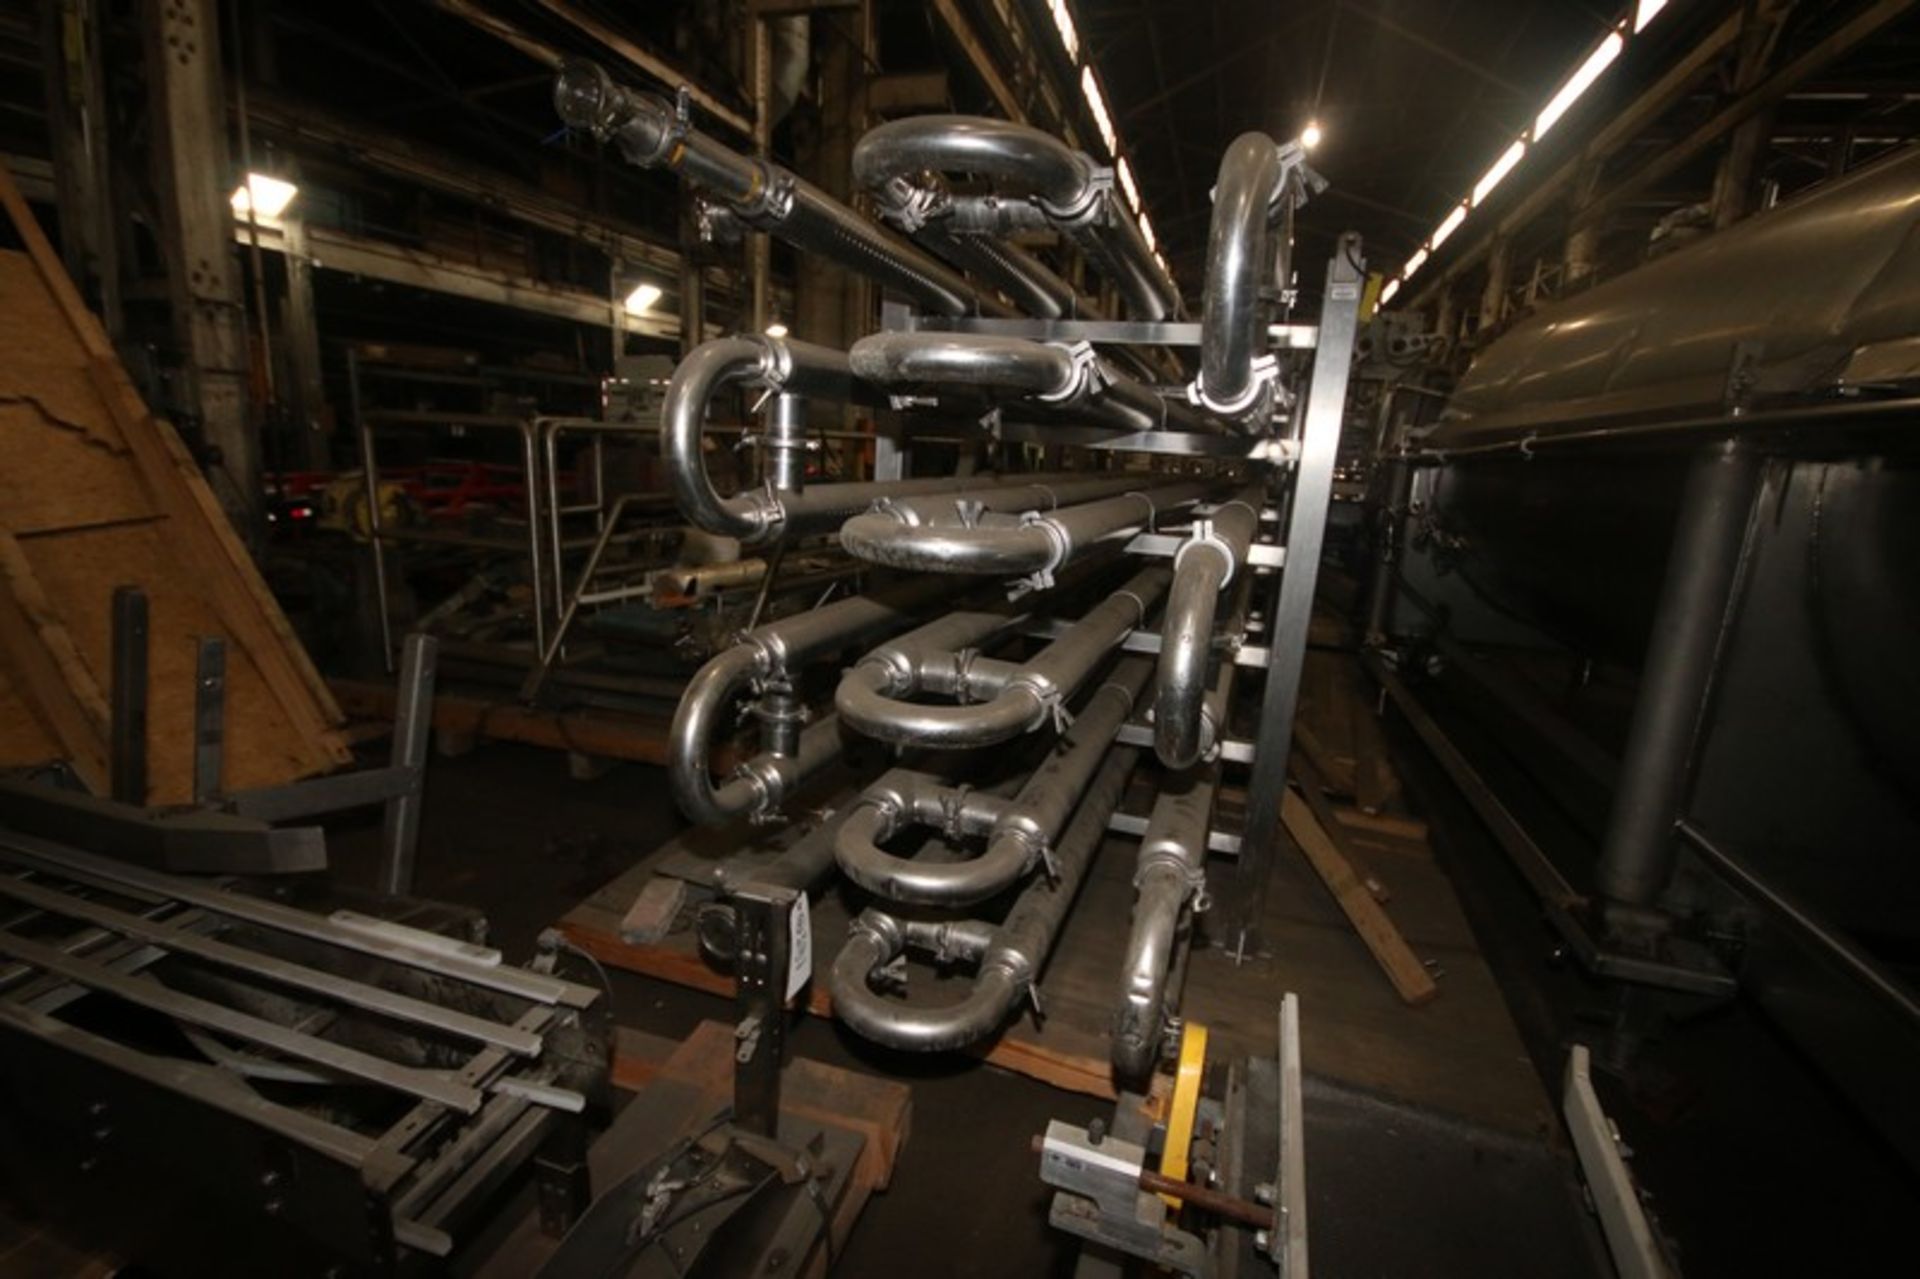 Aprox. 4" S/S Tubular Heat Exchanger, with (24) Tubes, Overall Dims.: 21' L x 48" W x 74" H, Mounted - Image 3 of 7